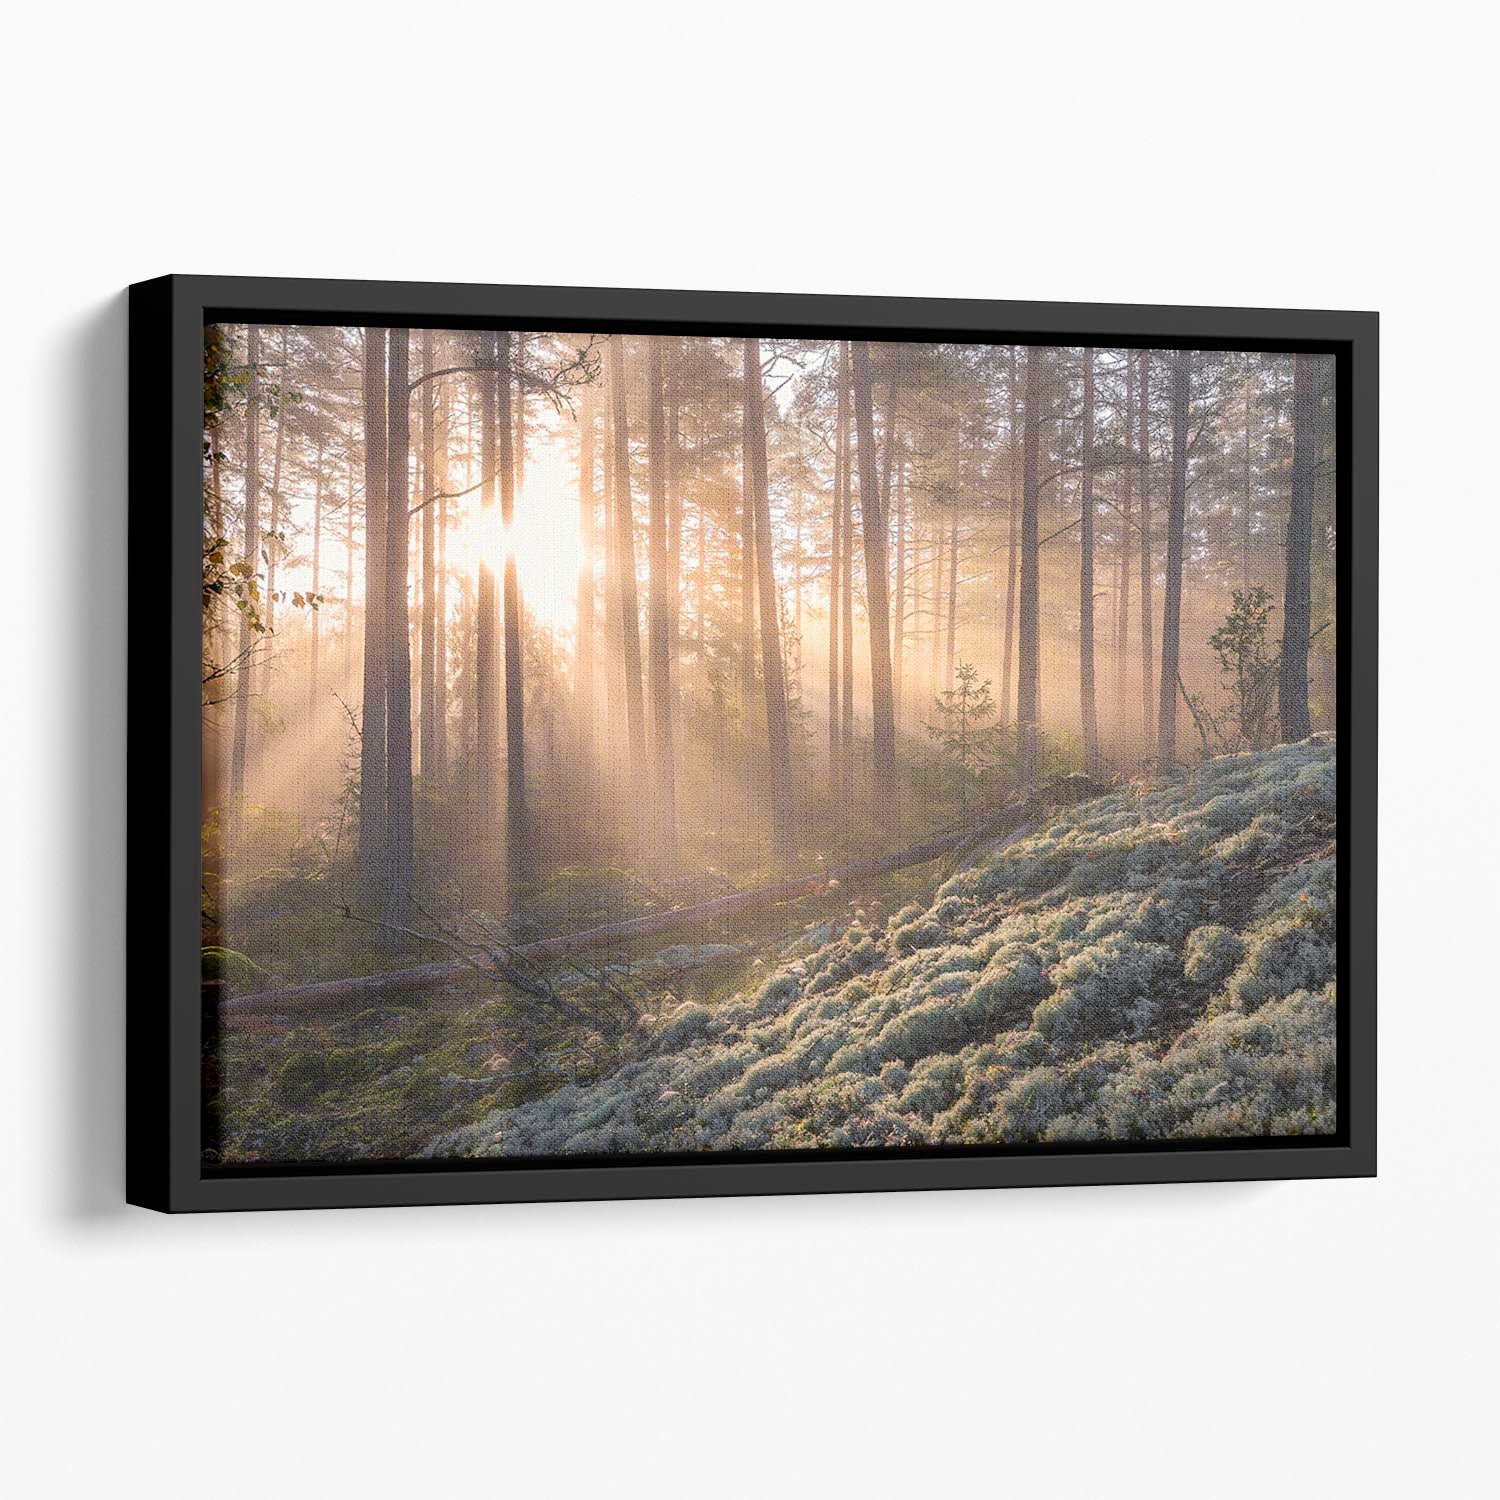 Fog In The Forest With White Moss In The Forground Floating Framed Canvas - Canvas Art Rocks - 1